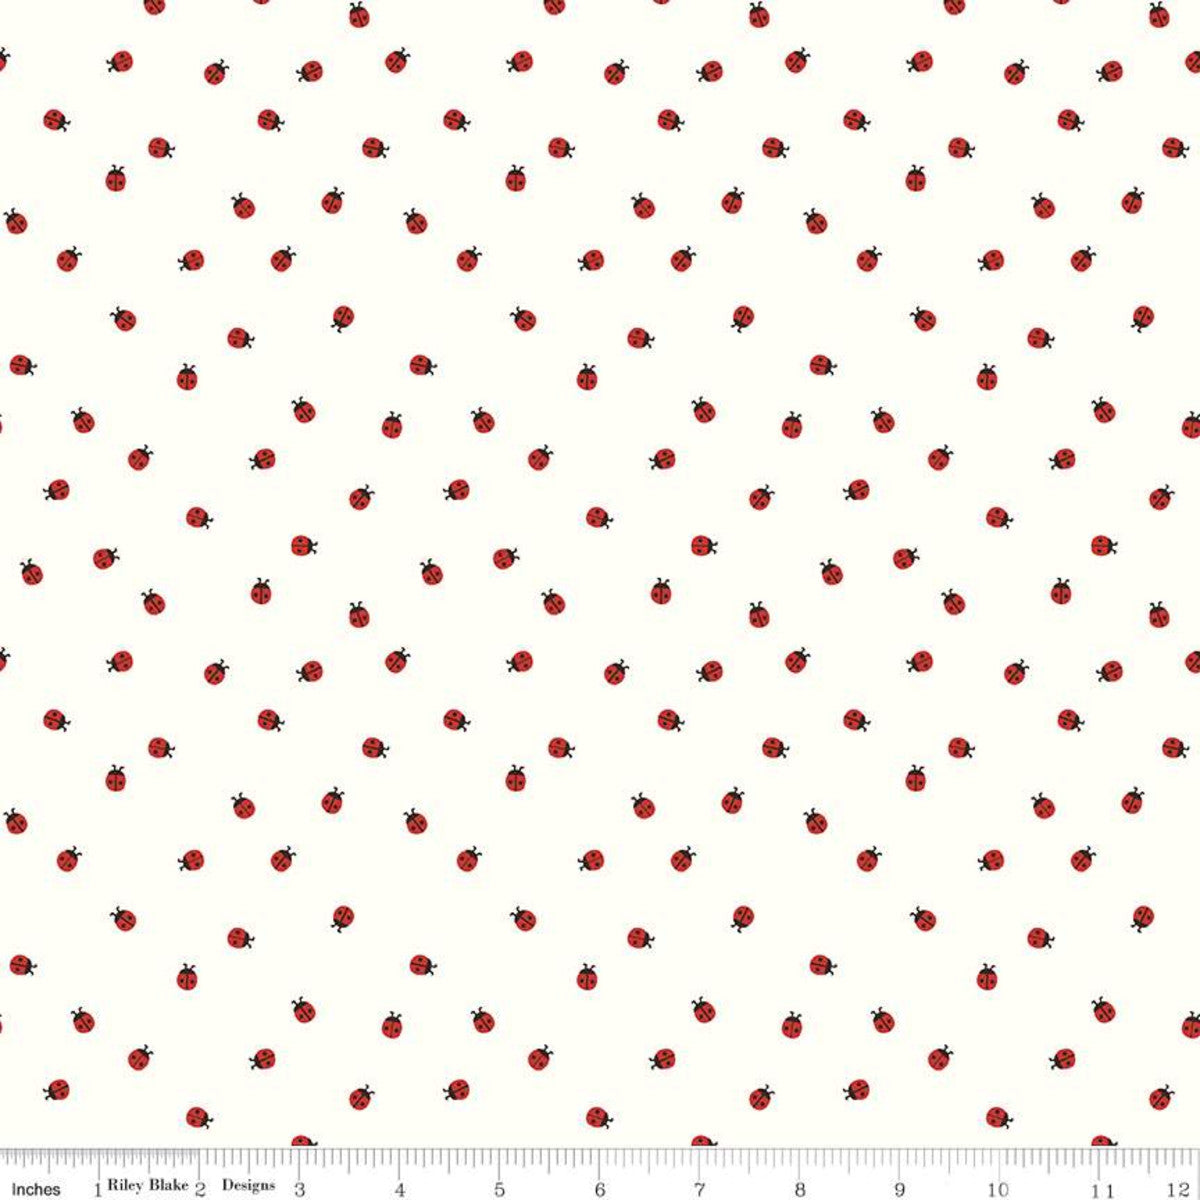 Red Hot Collection Ladybugs on White Cream Citrus and Mint for Riley Blake Designs Cotton Quilt Fabric Material ladybugs ladybirds 